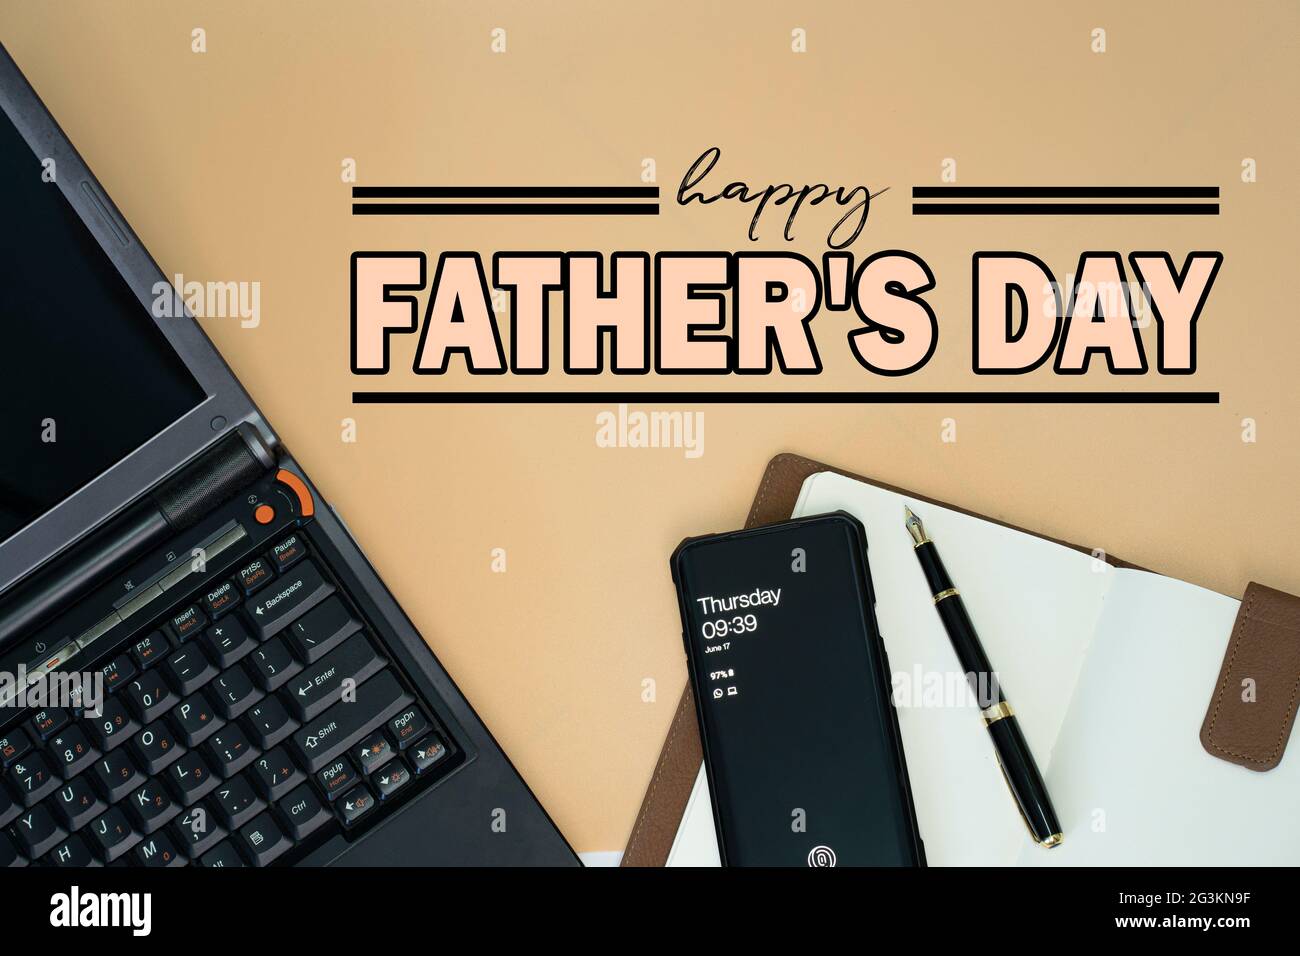 Happy Father's Day concept with laptop, smartphone, pen, notebook and text. Selective focus points Stock Photo